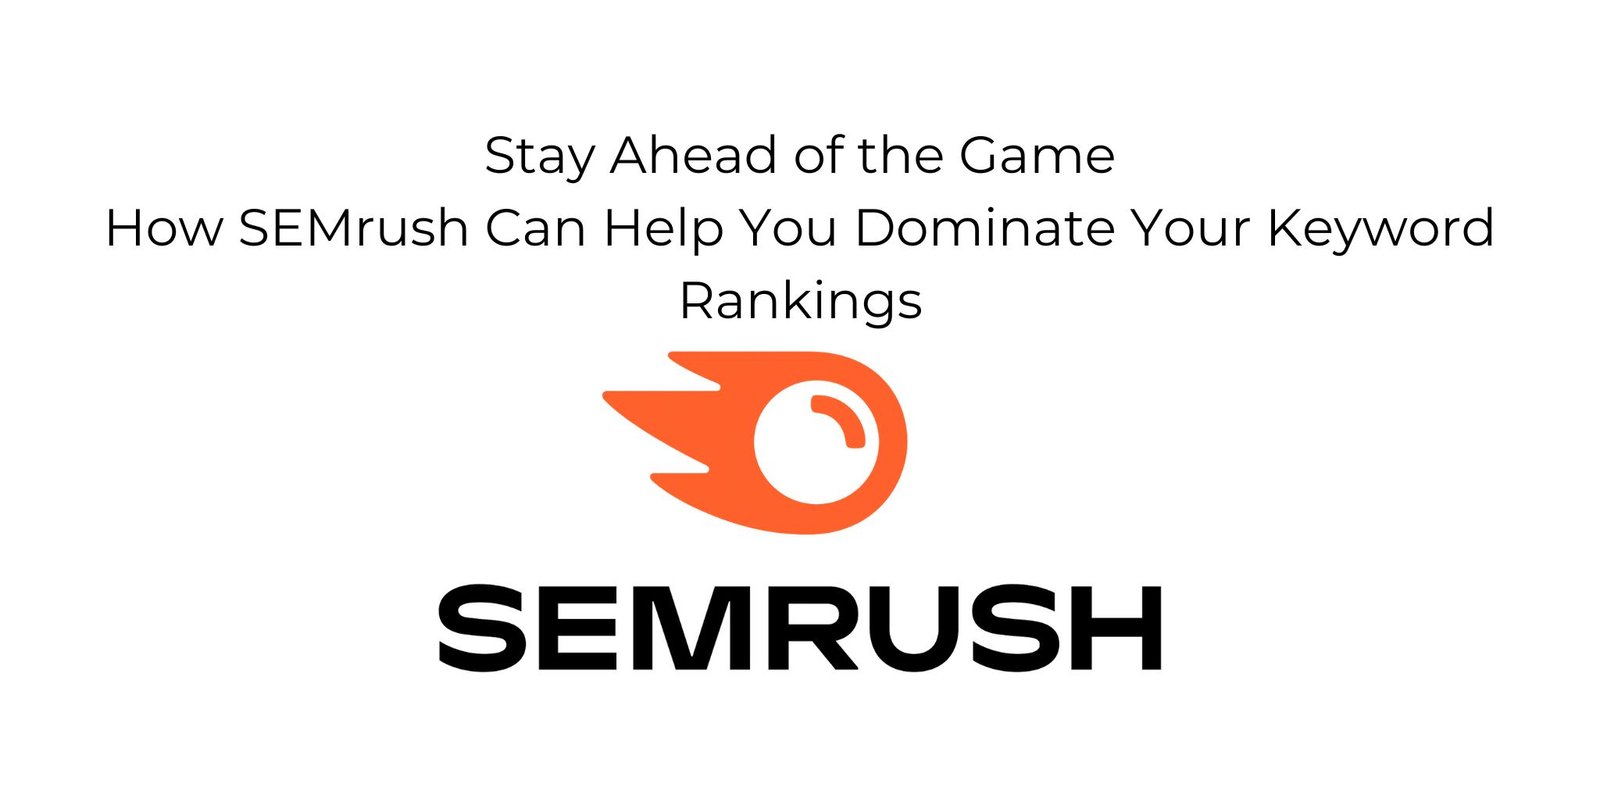 Stay Ahead of the Game - How SEMrush Can Help You Dominate Your Keyword Rankings